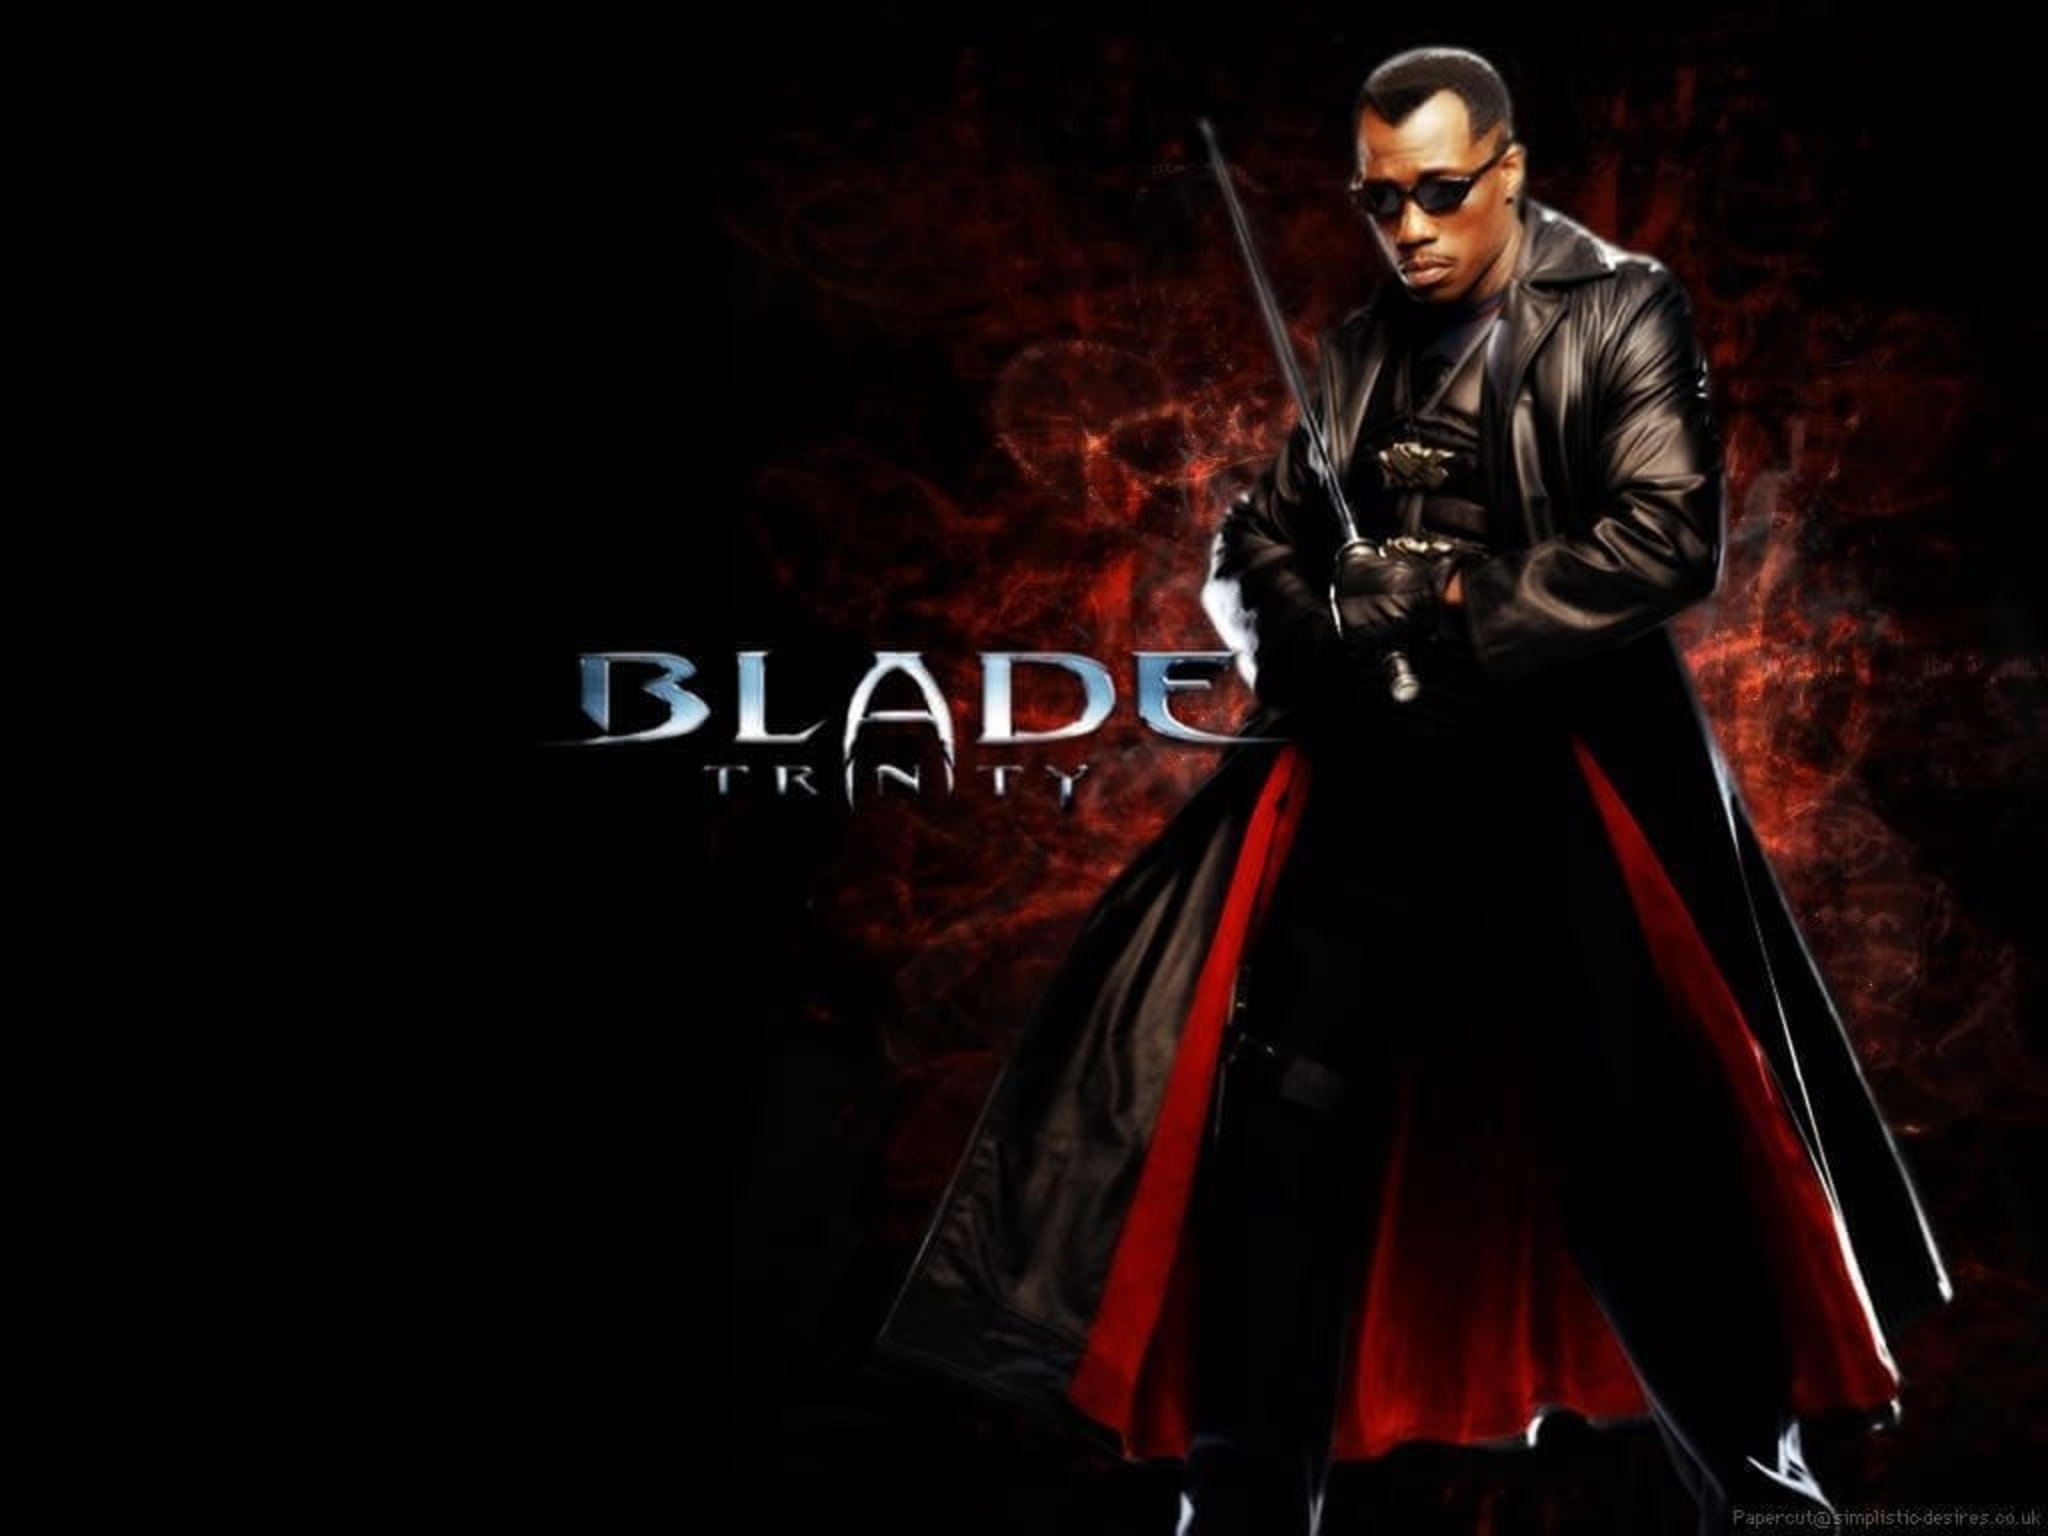 The Blade Online Slot Demo Game by Playtech